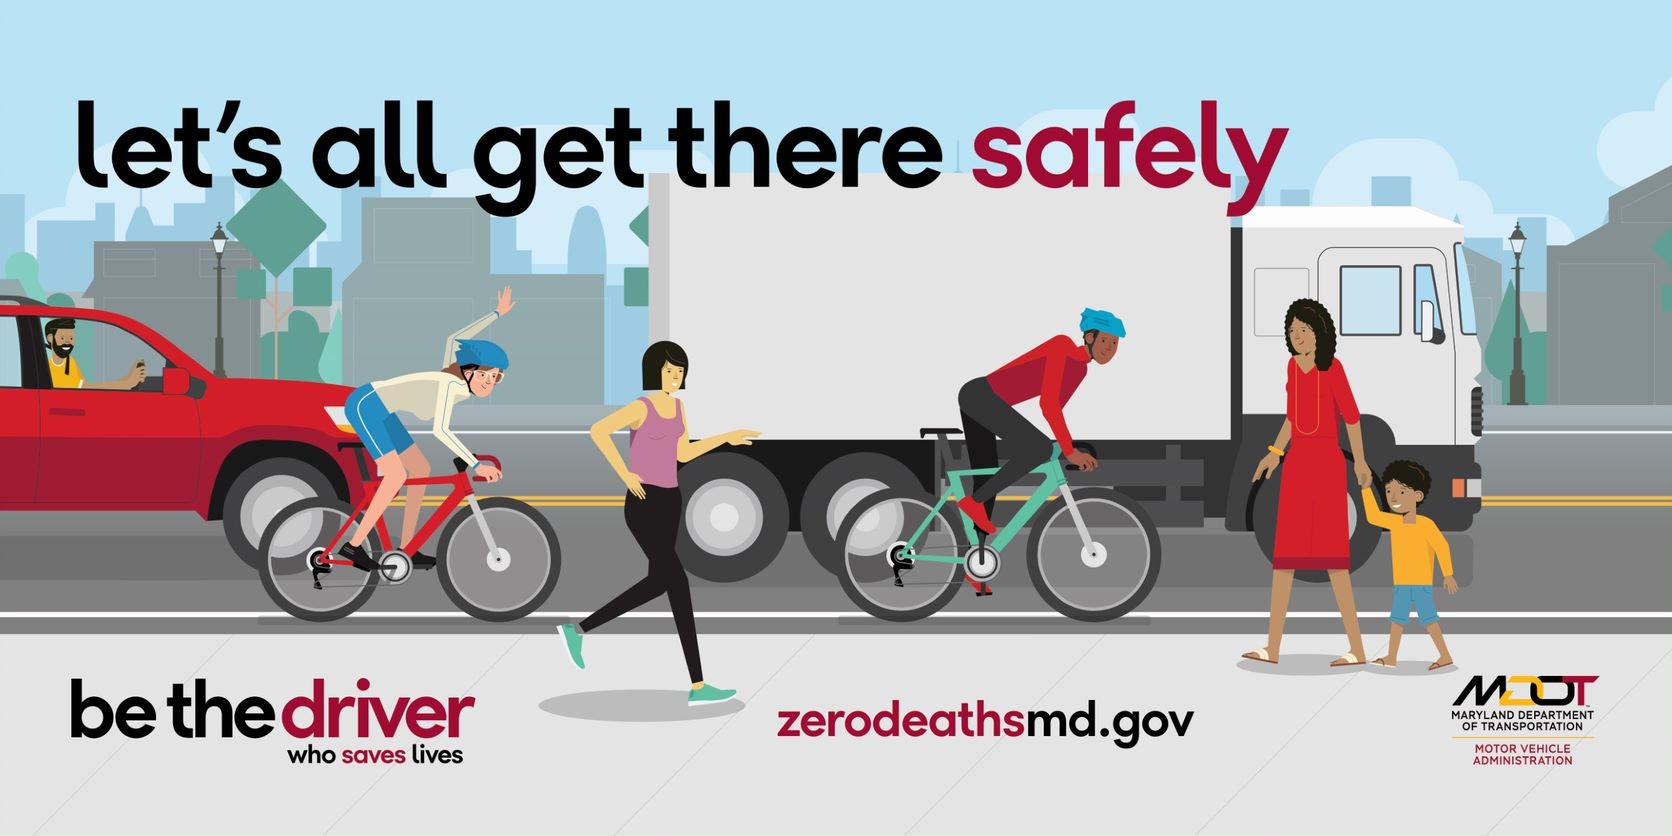 Pedestrian & Bicycle Safety - Facts, Tips - Zero Deaths MD